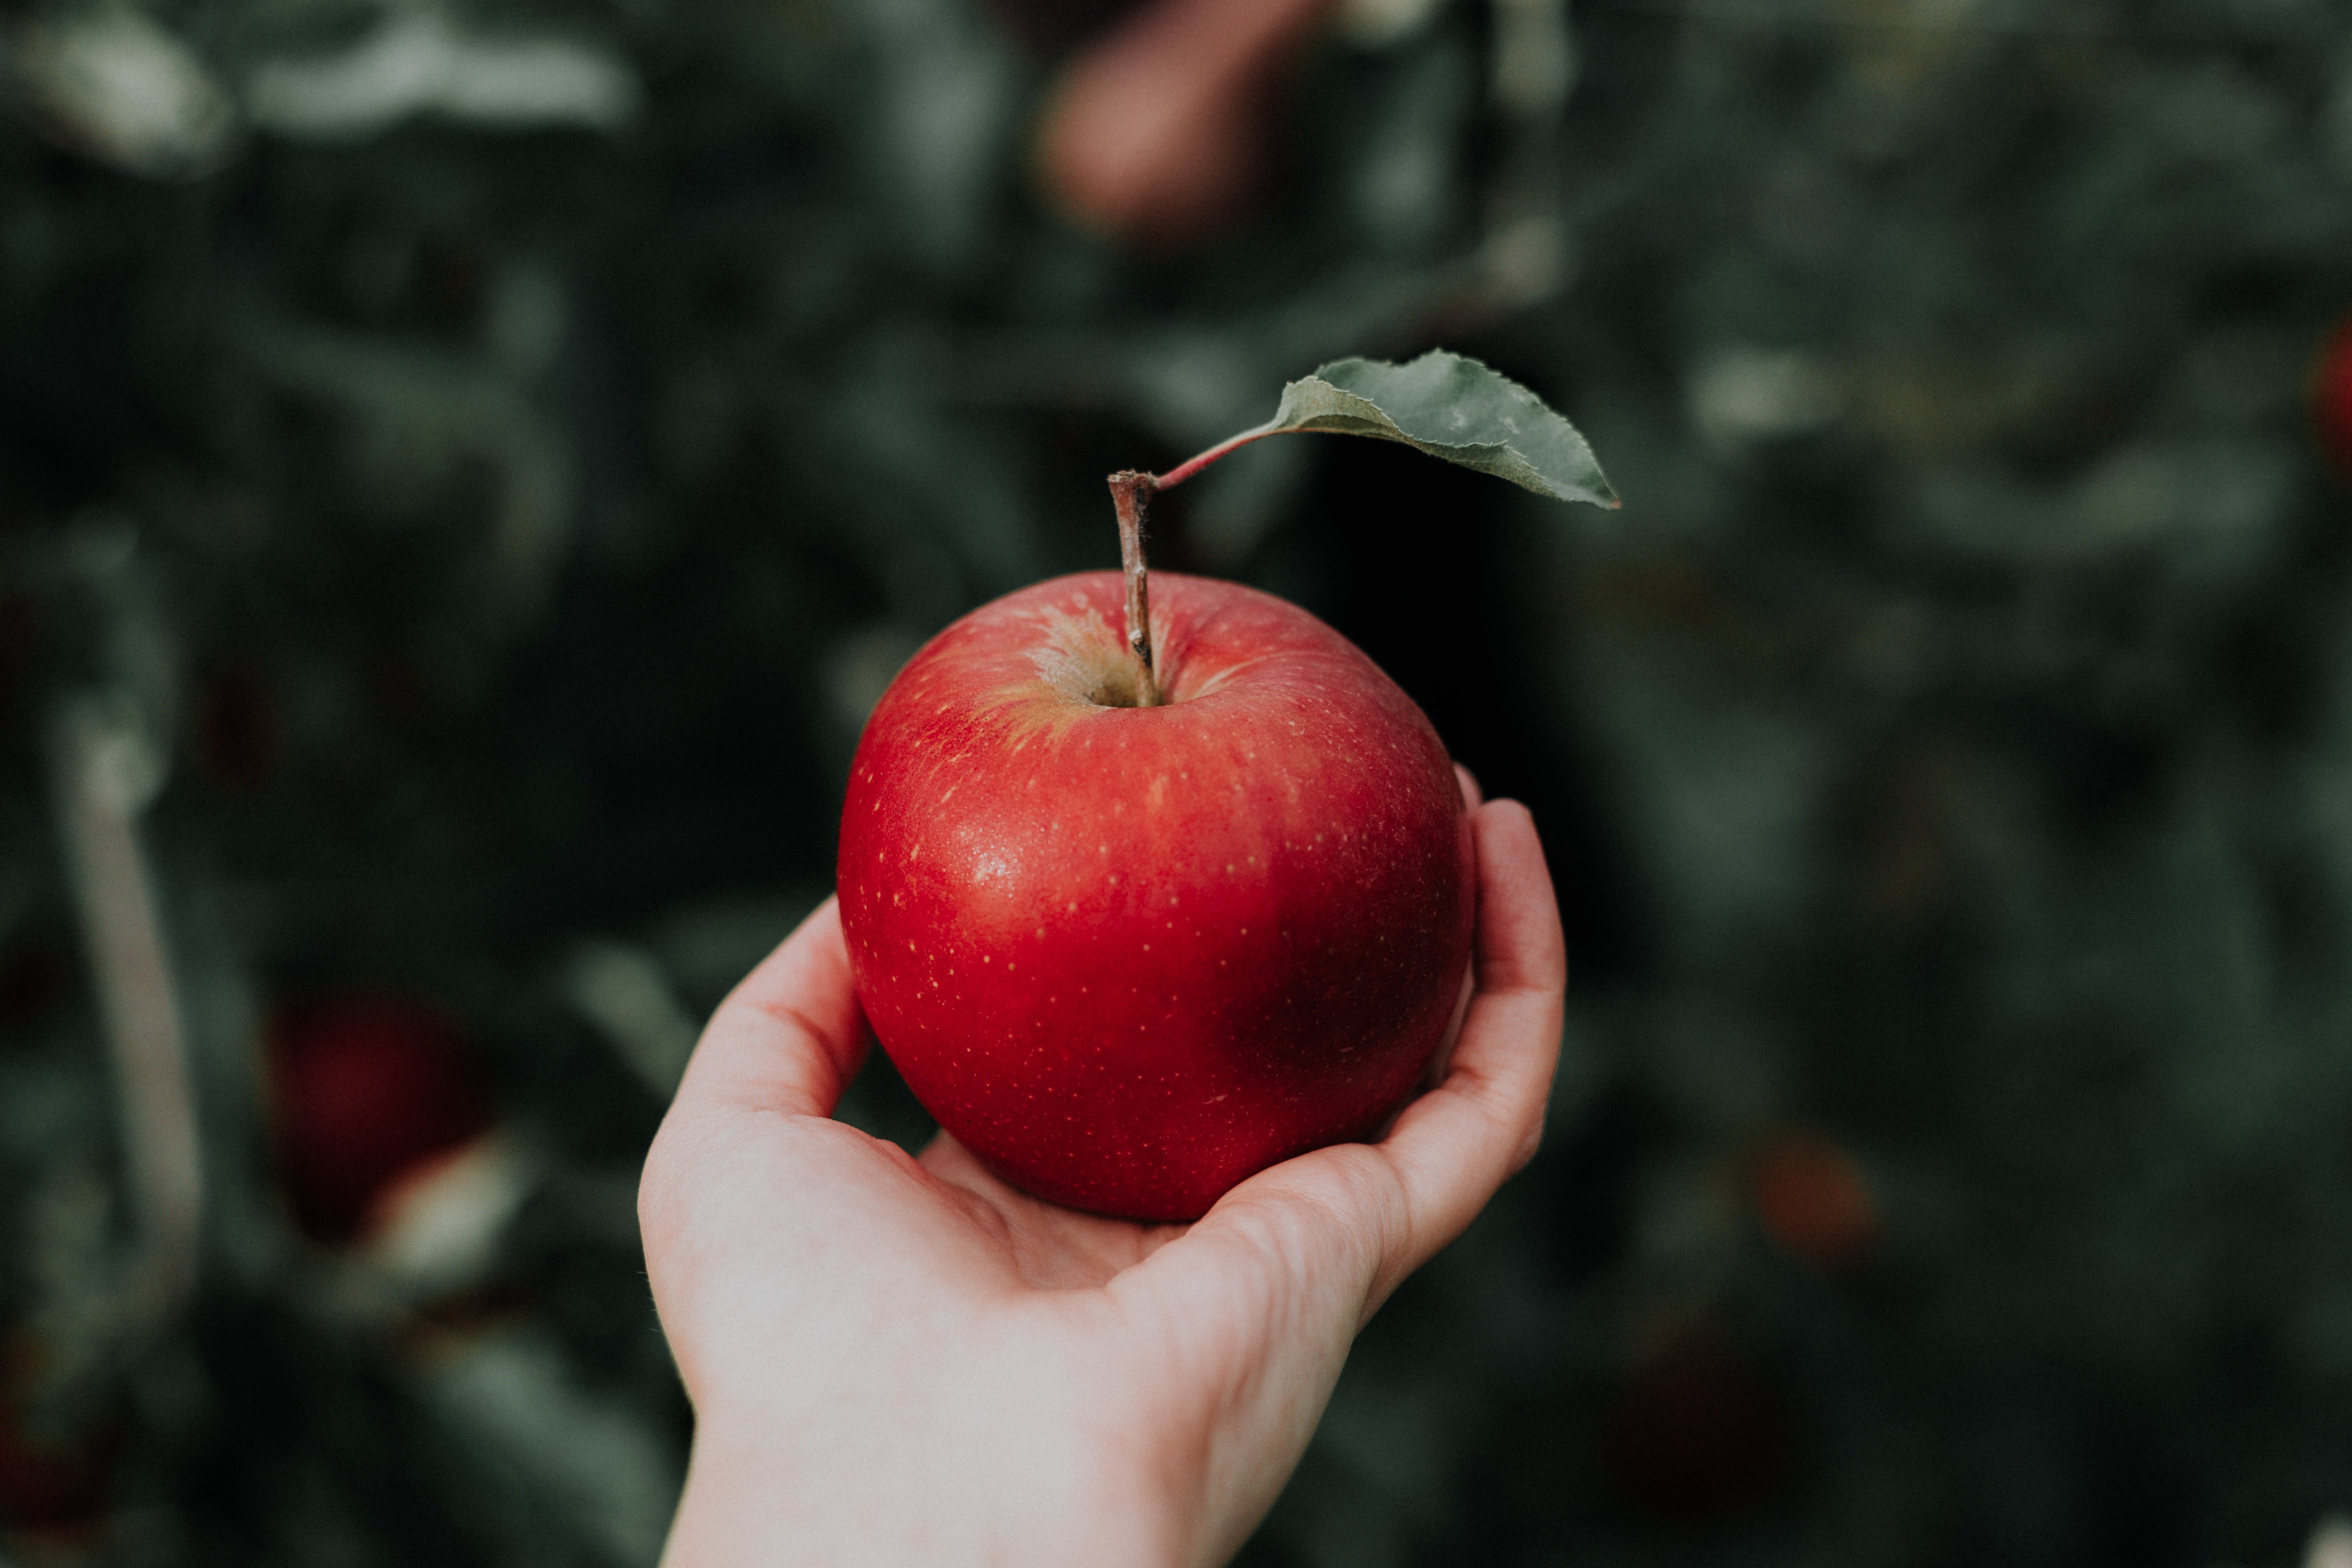 The boys had an apple to divide. | Source: Unsplash